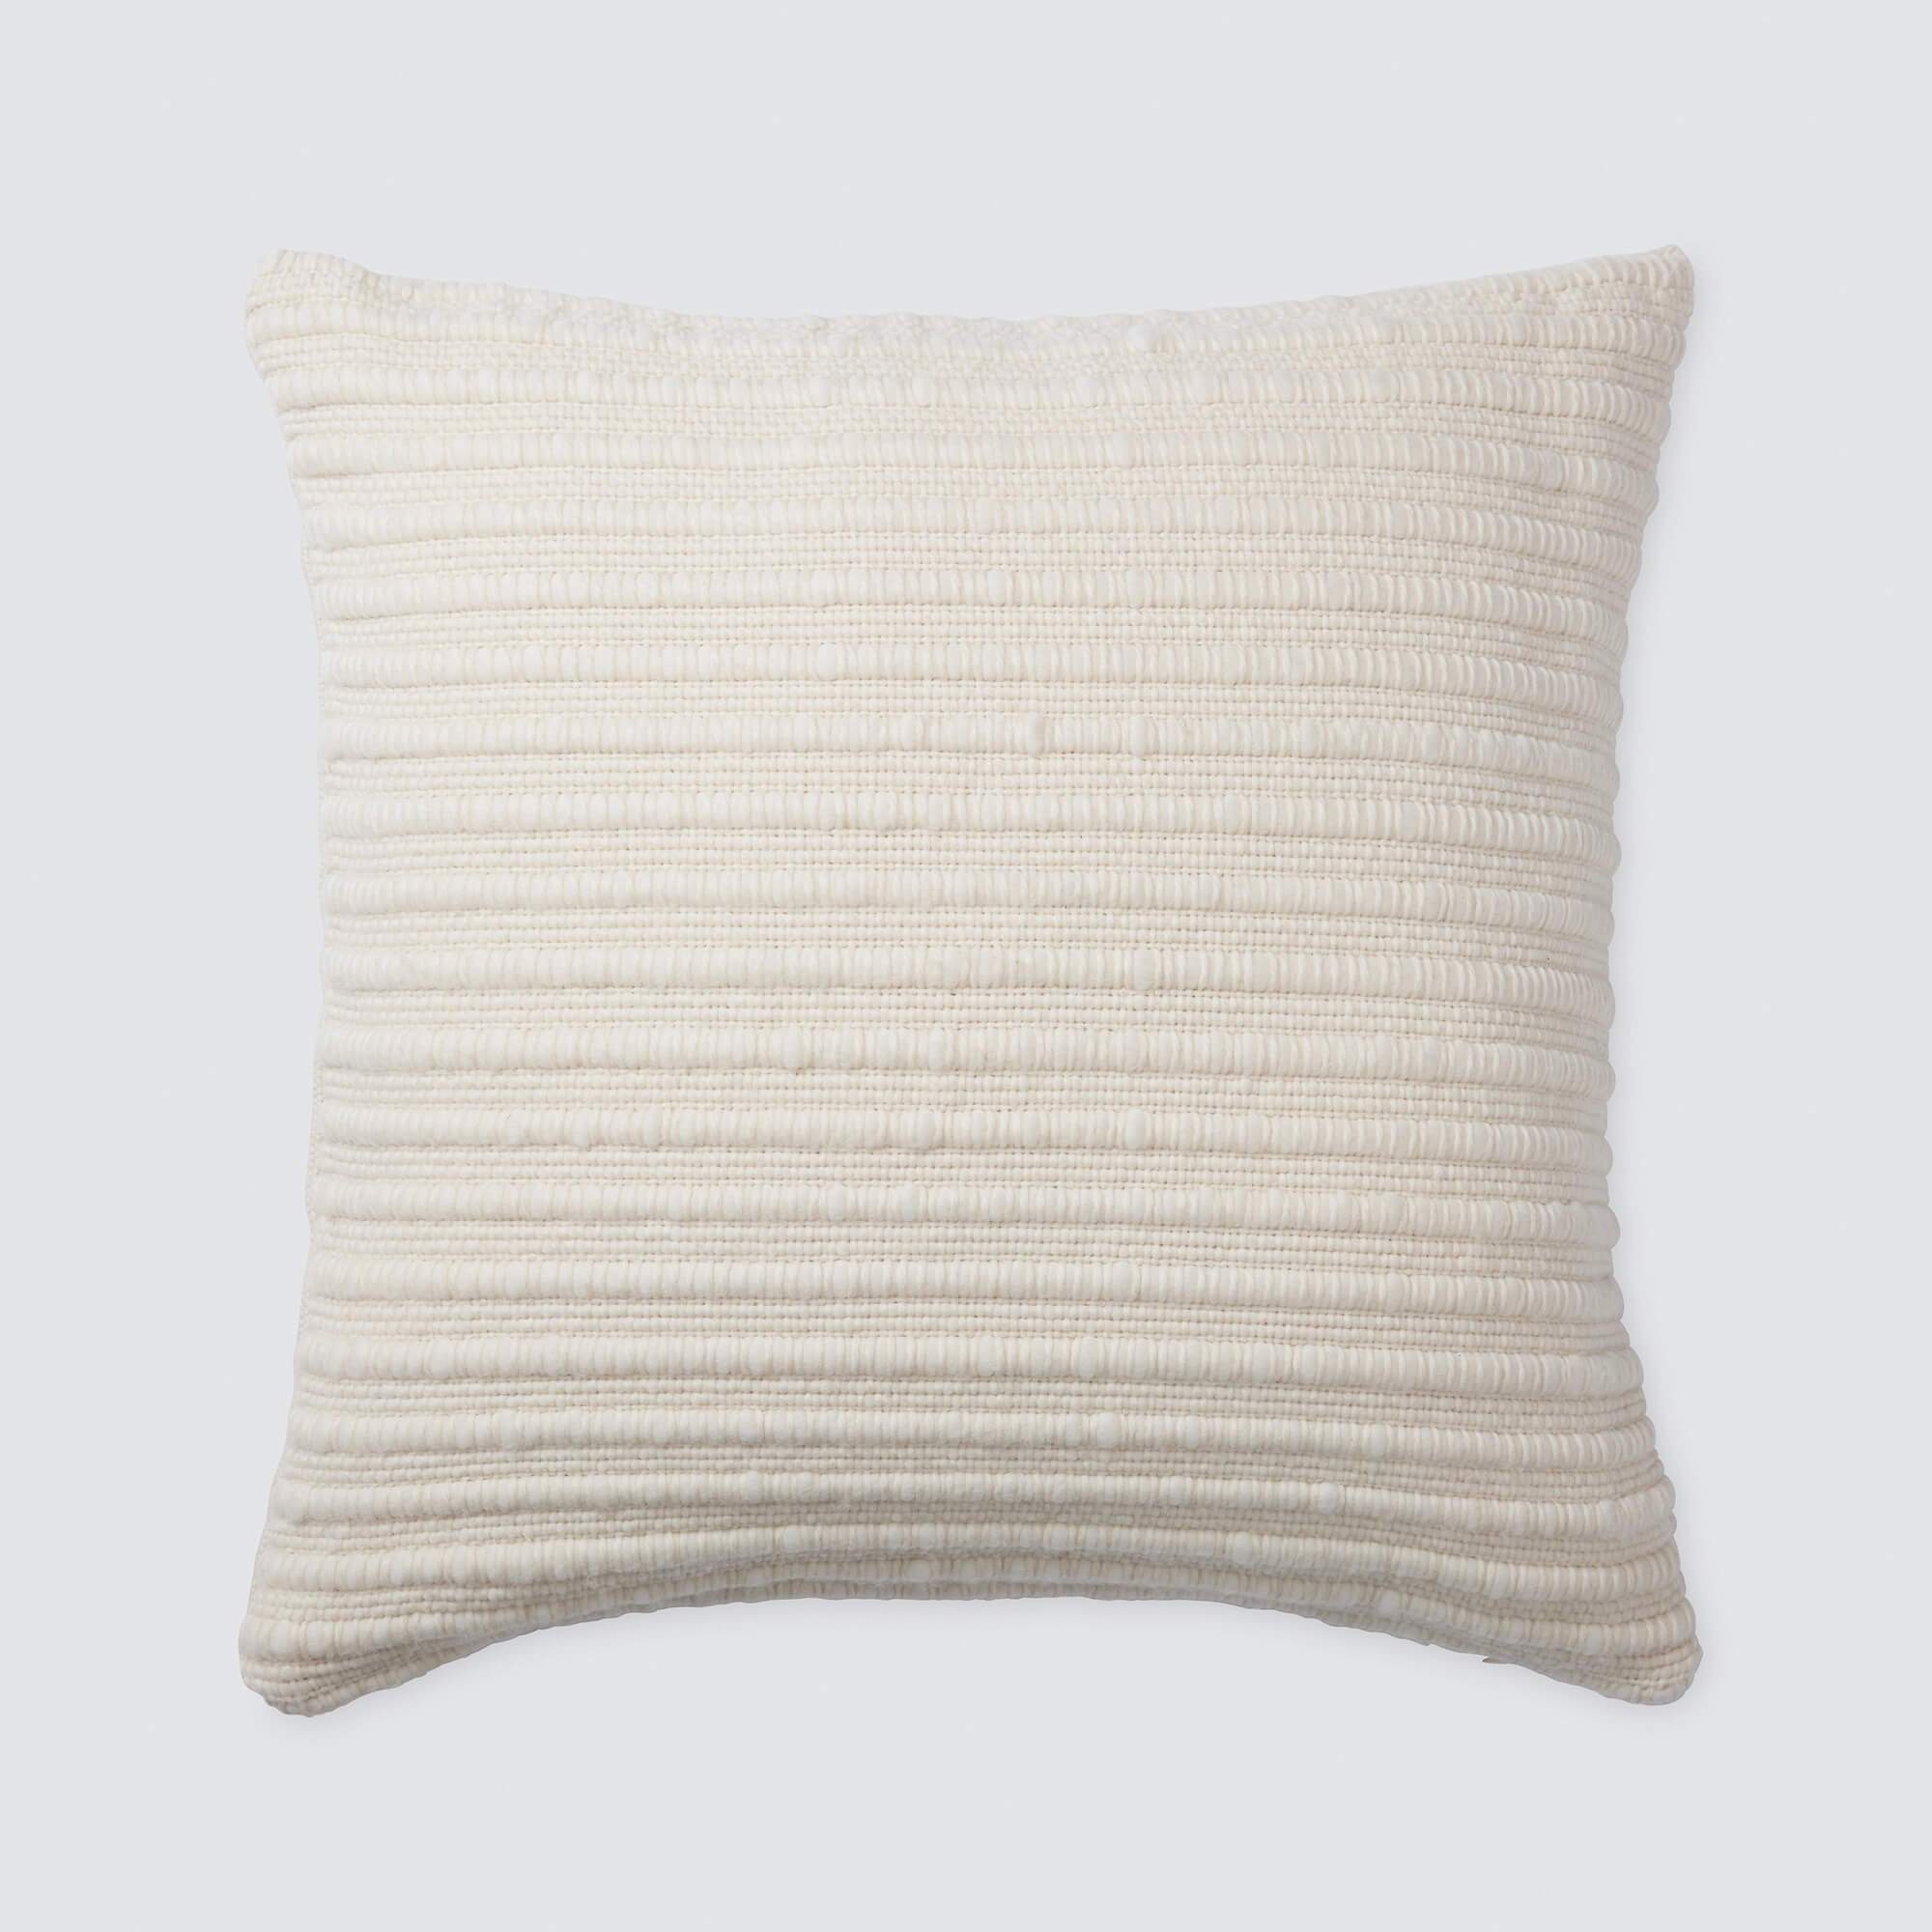 La Duna Pillow - 20 in. x 20 in. By The Citizenry - Image 0